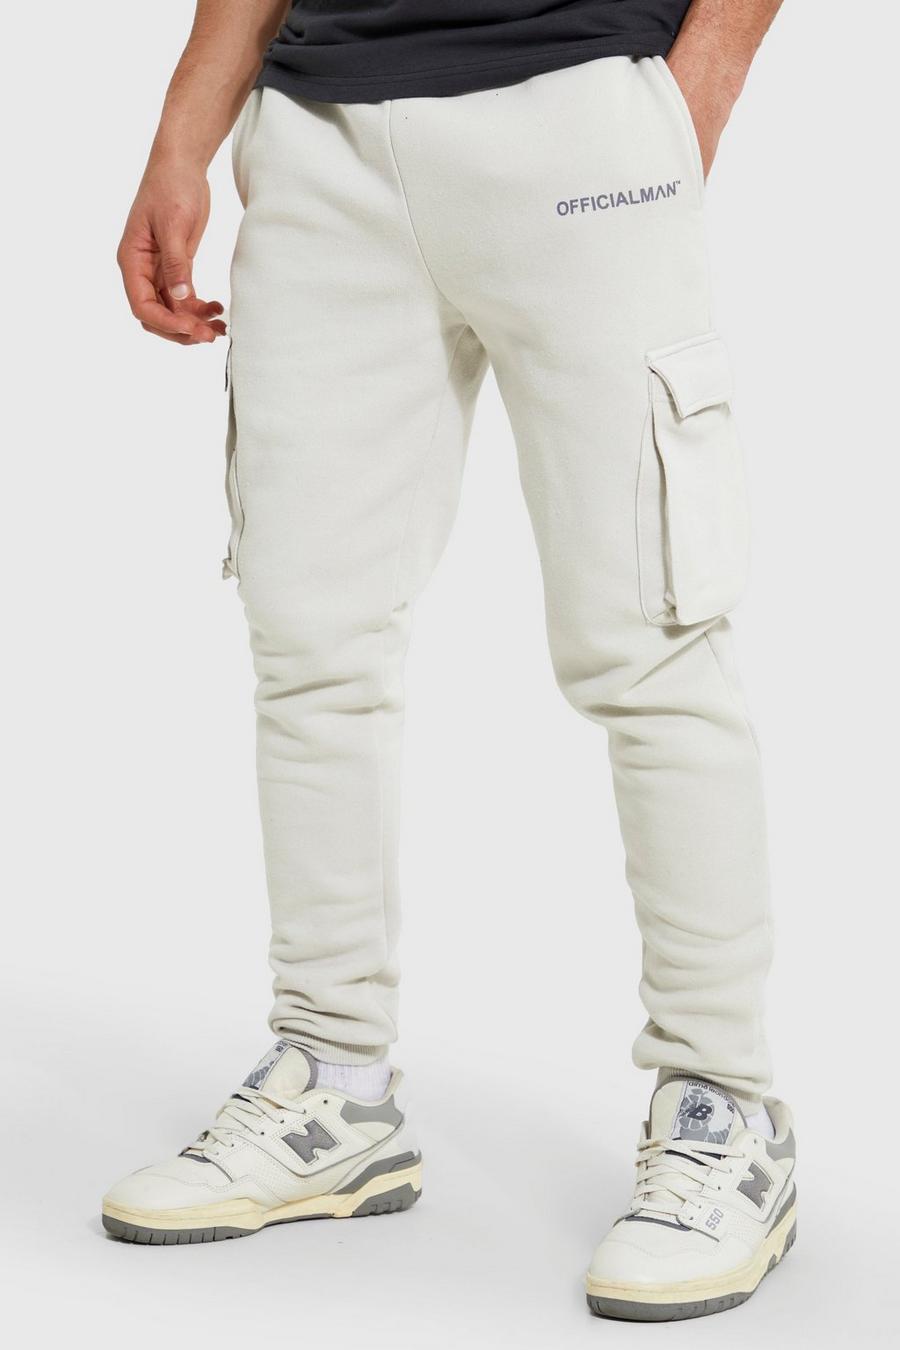 Grey Official Man Skinny Fit Cargo Jogger